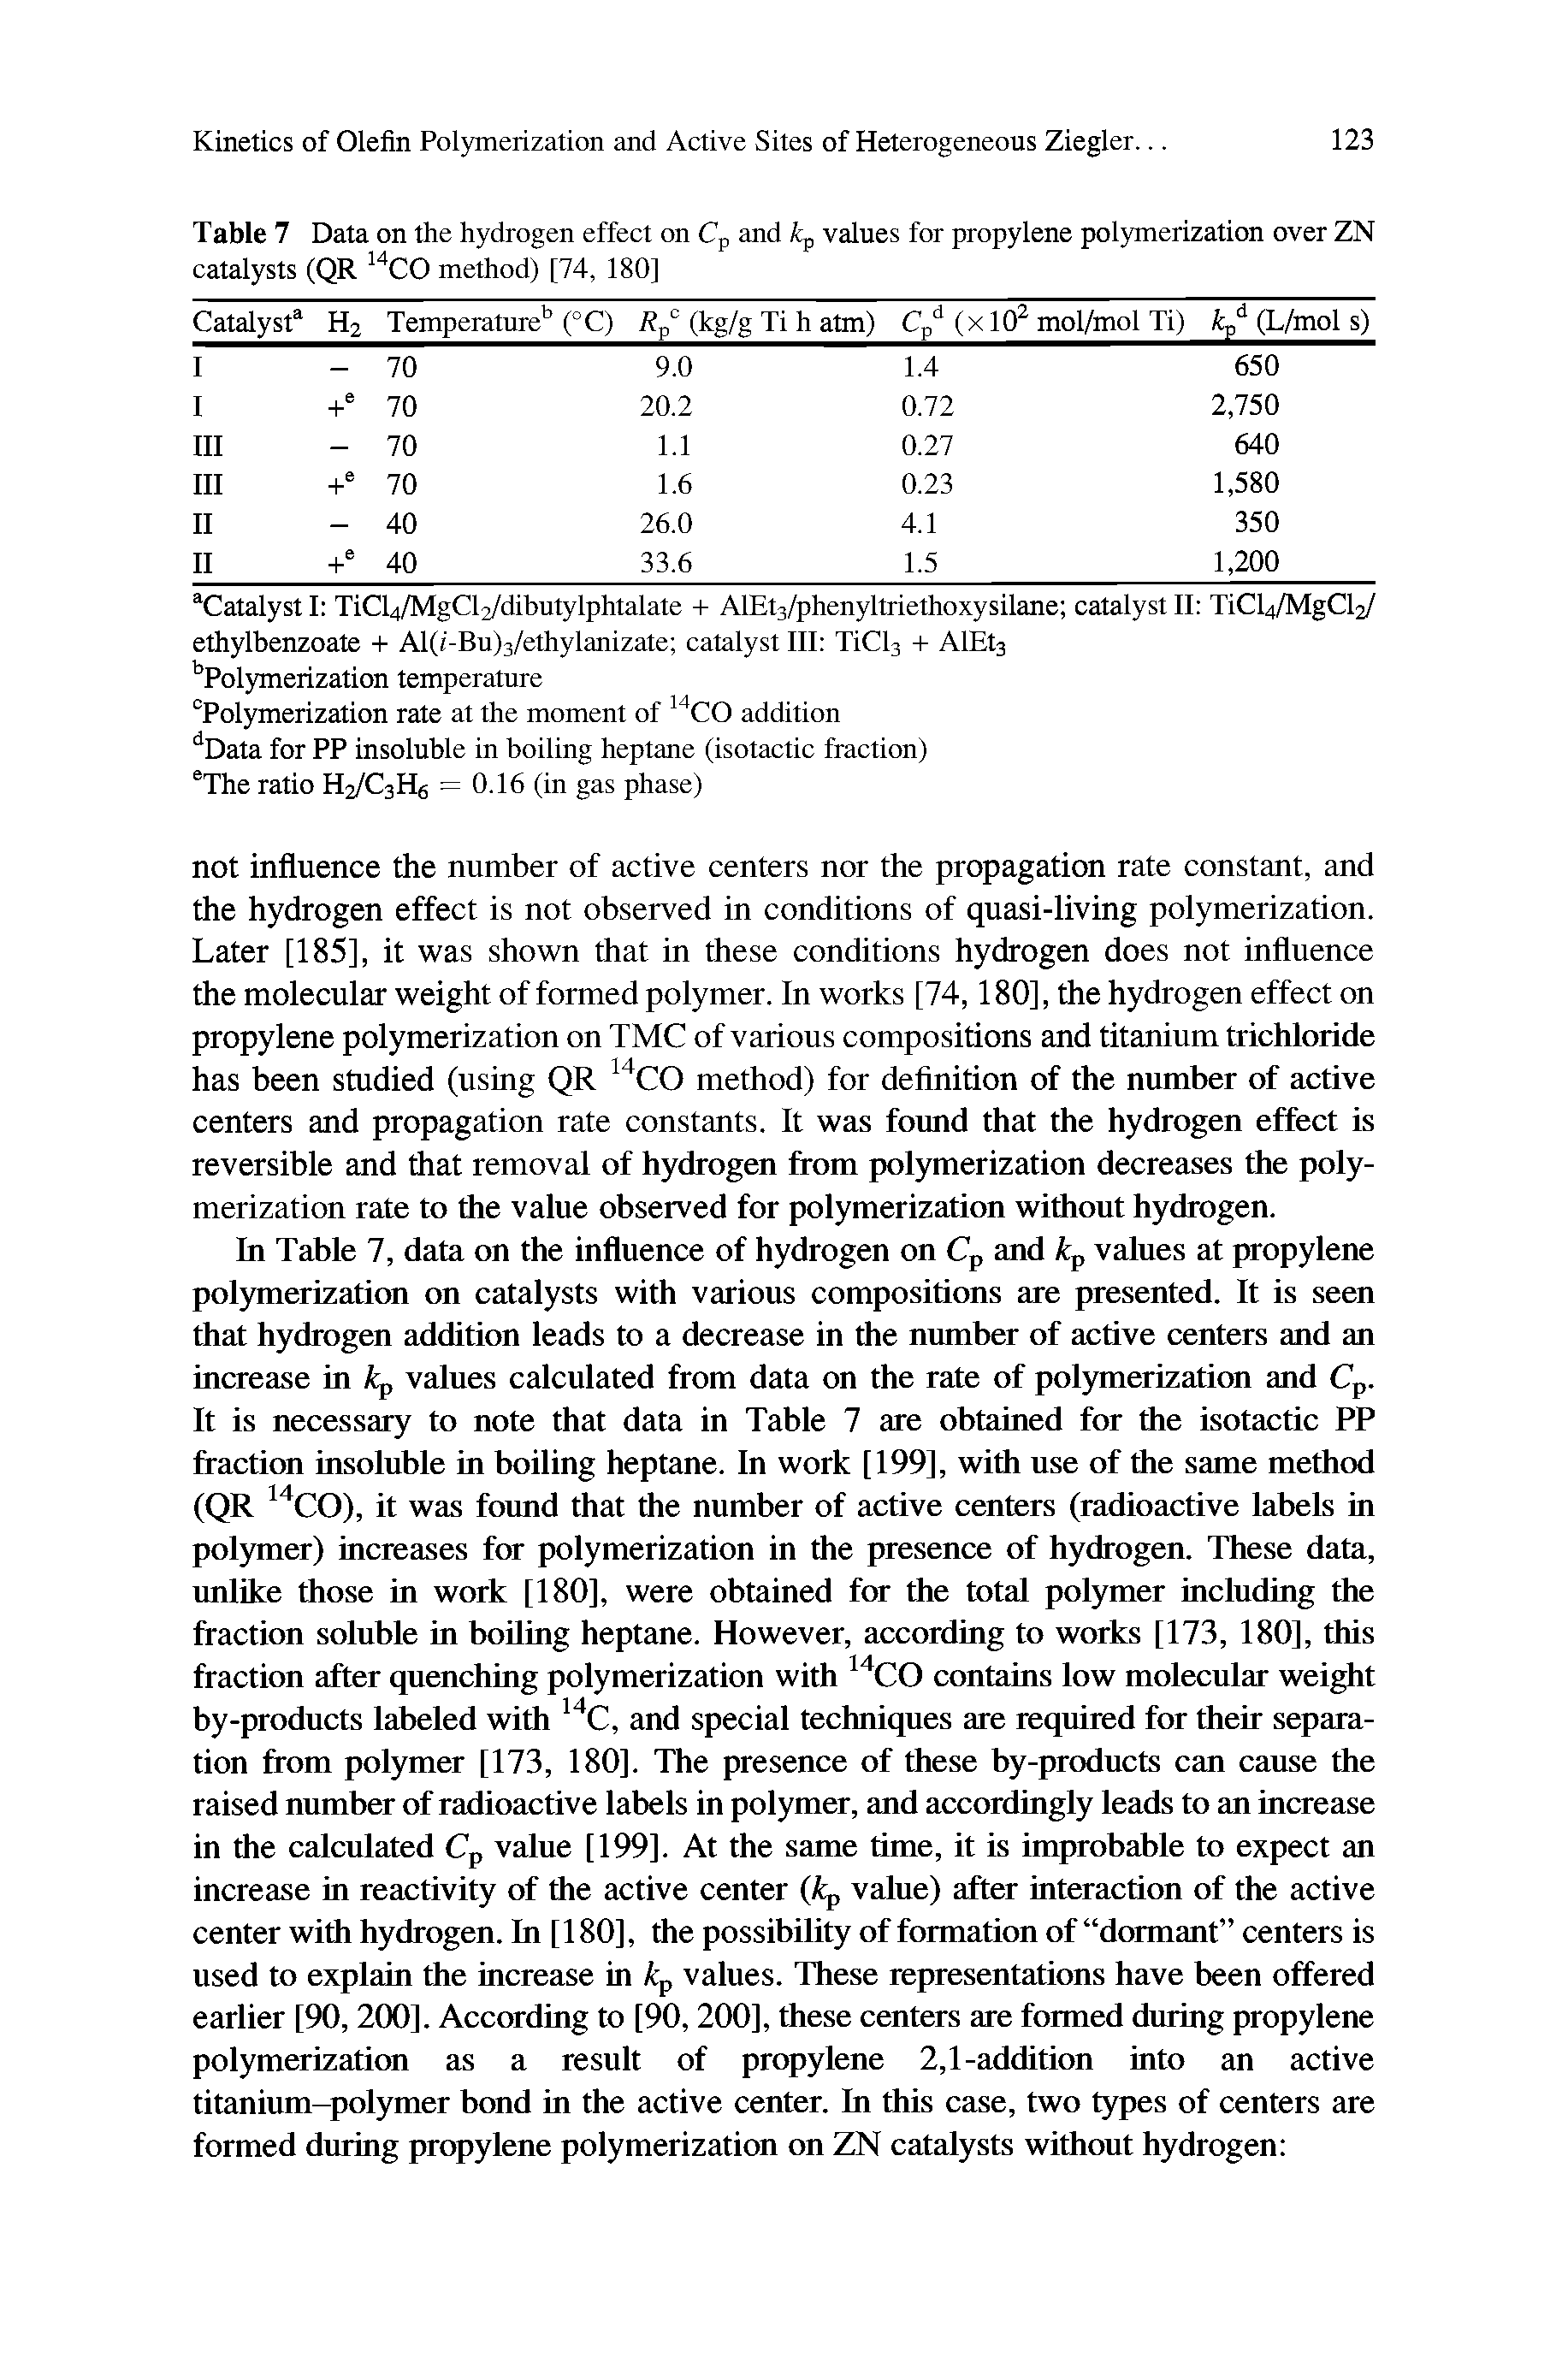 Table 7 Data on the hydrogen effect on Cp and kp values for propylene polymerization over ZN catalysts (QR CO method) [74, 180]...